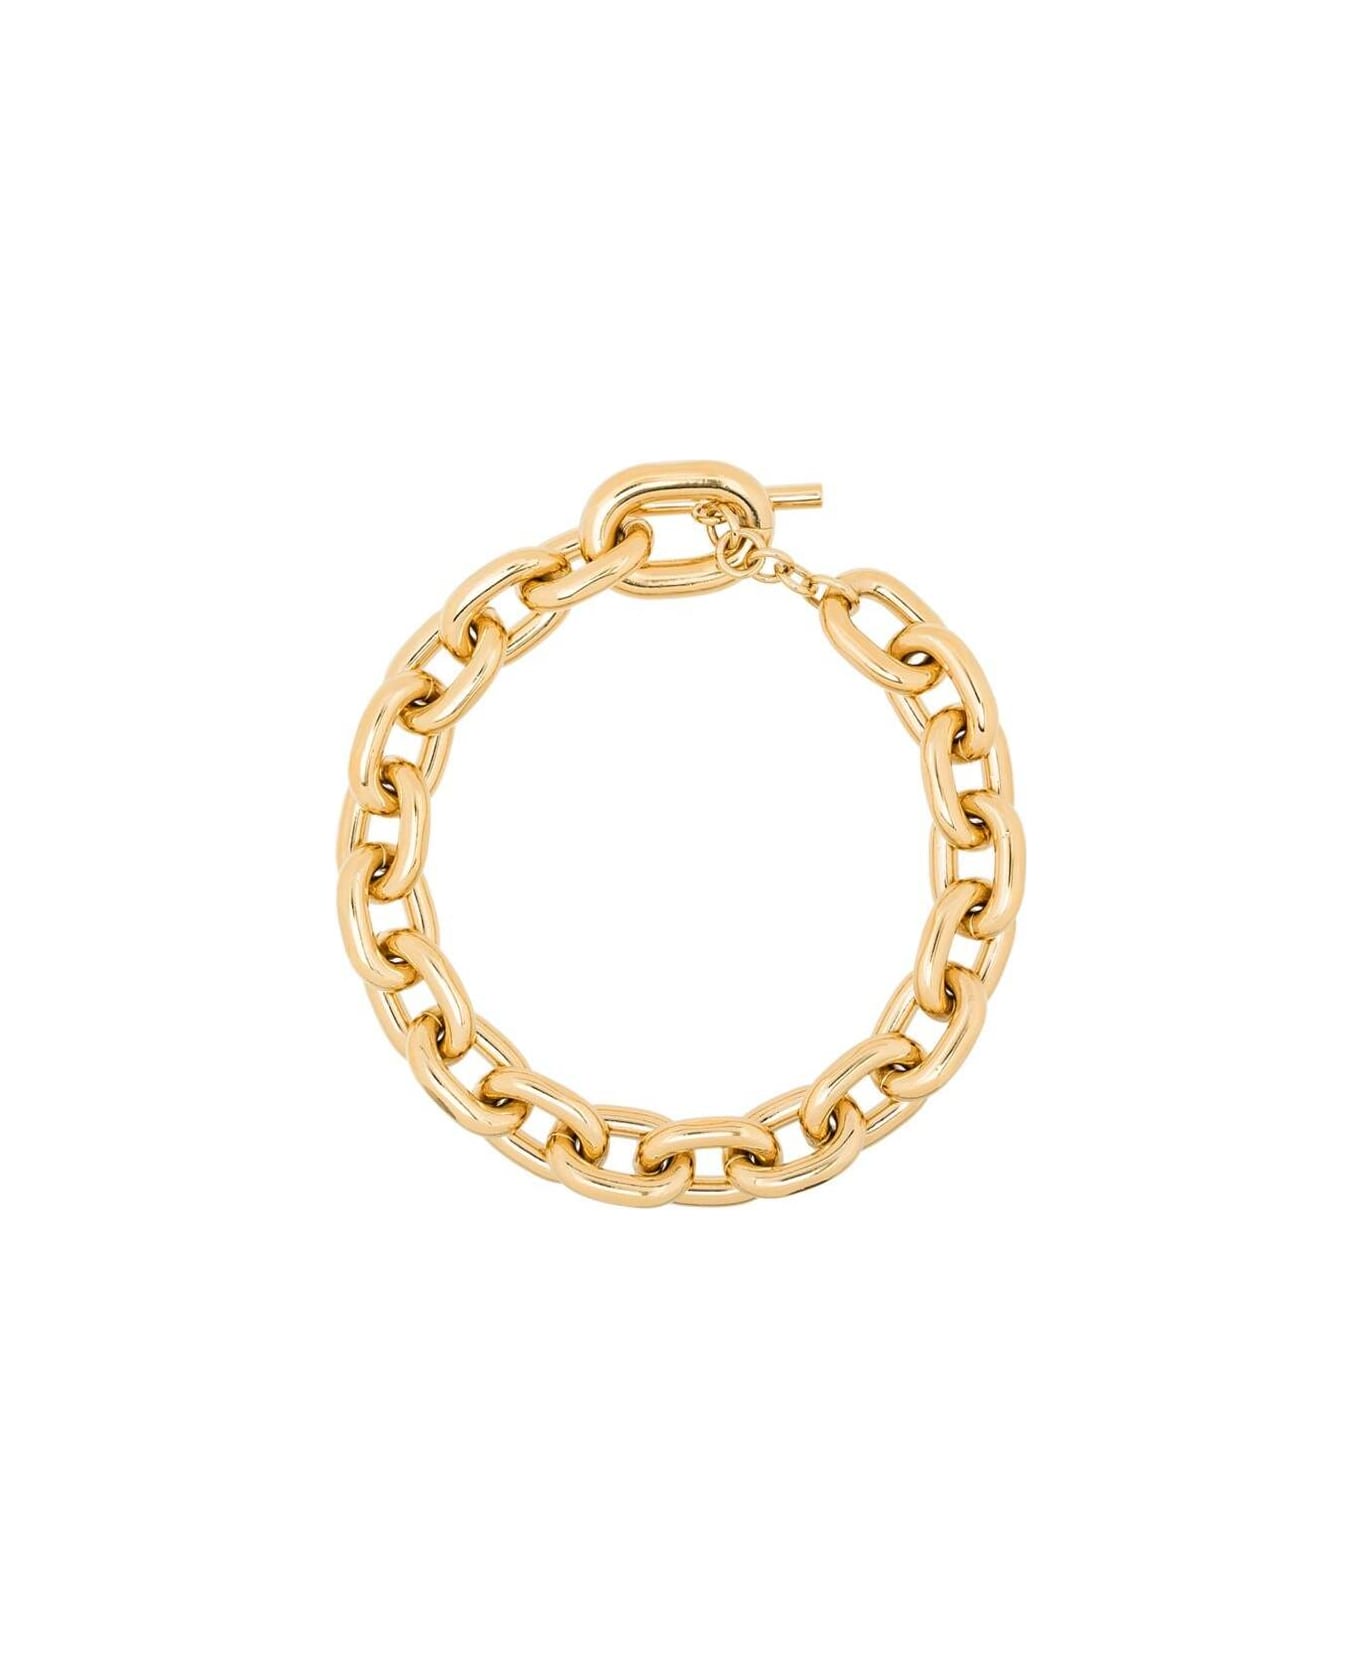 Paco Rabanne Woman's Gold-colored Aluminum Chain Necklace - GOLD